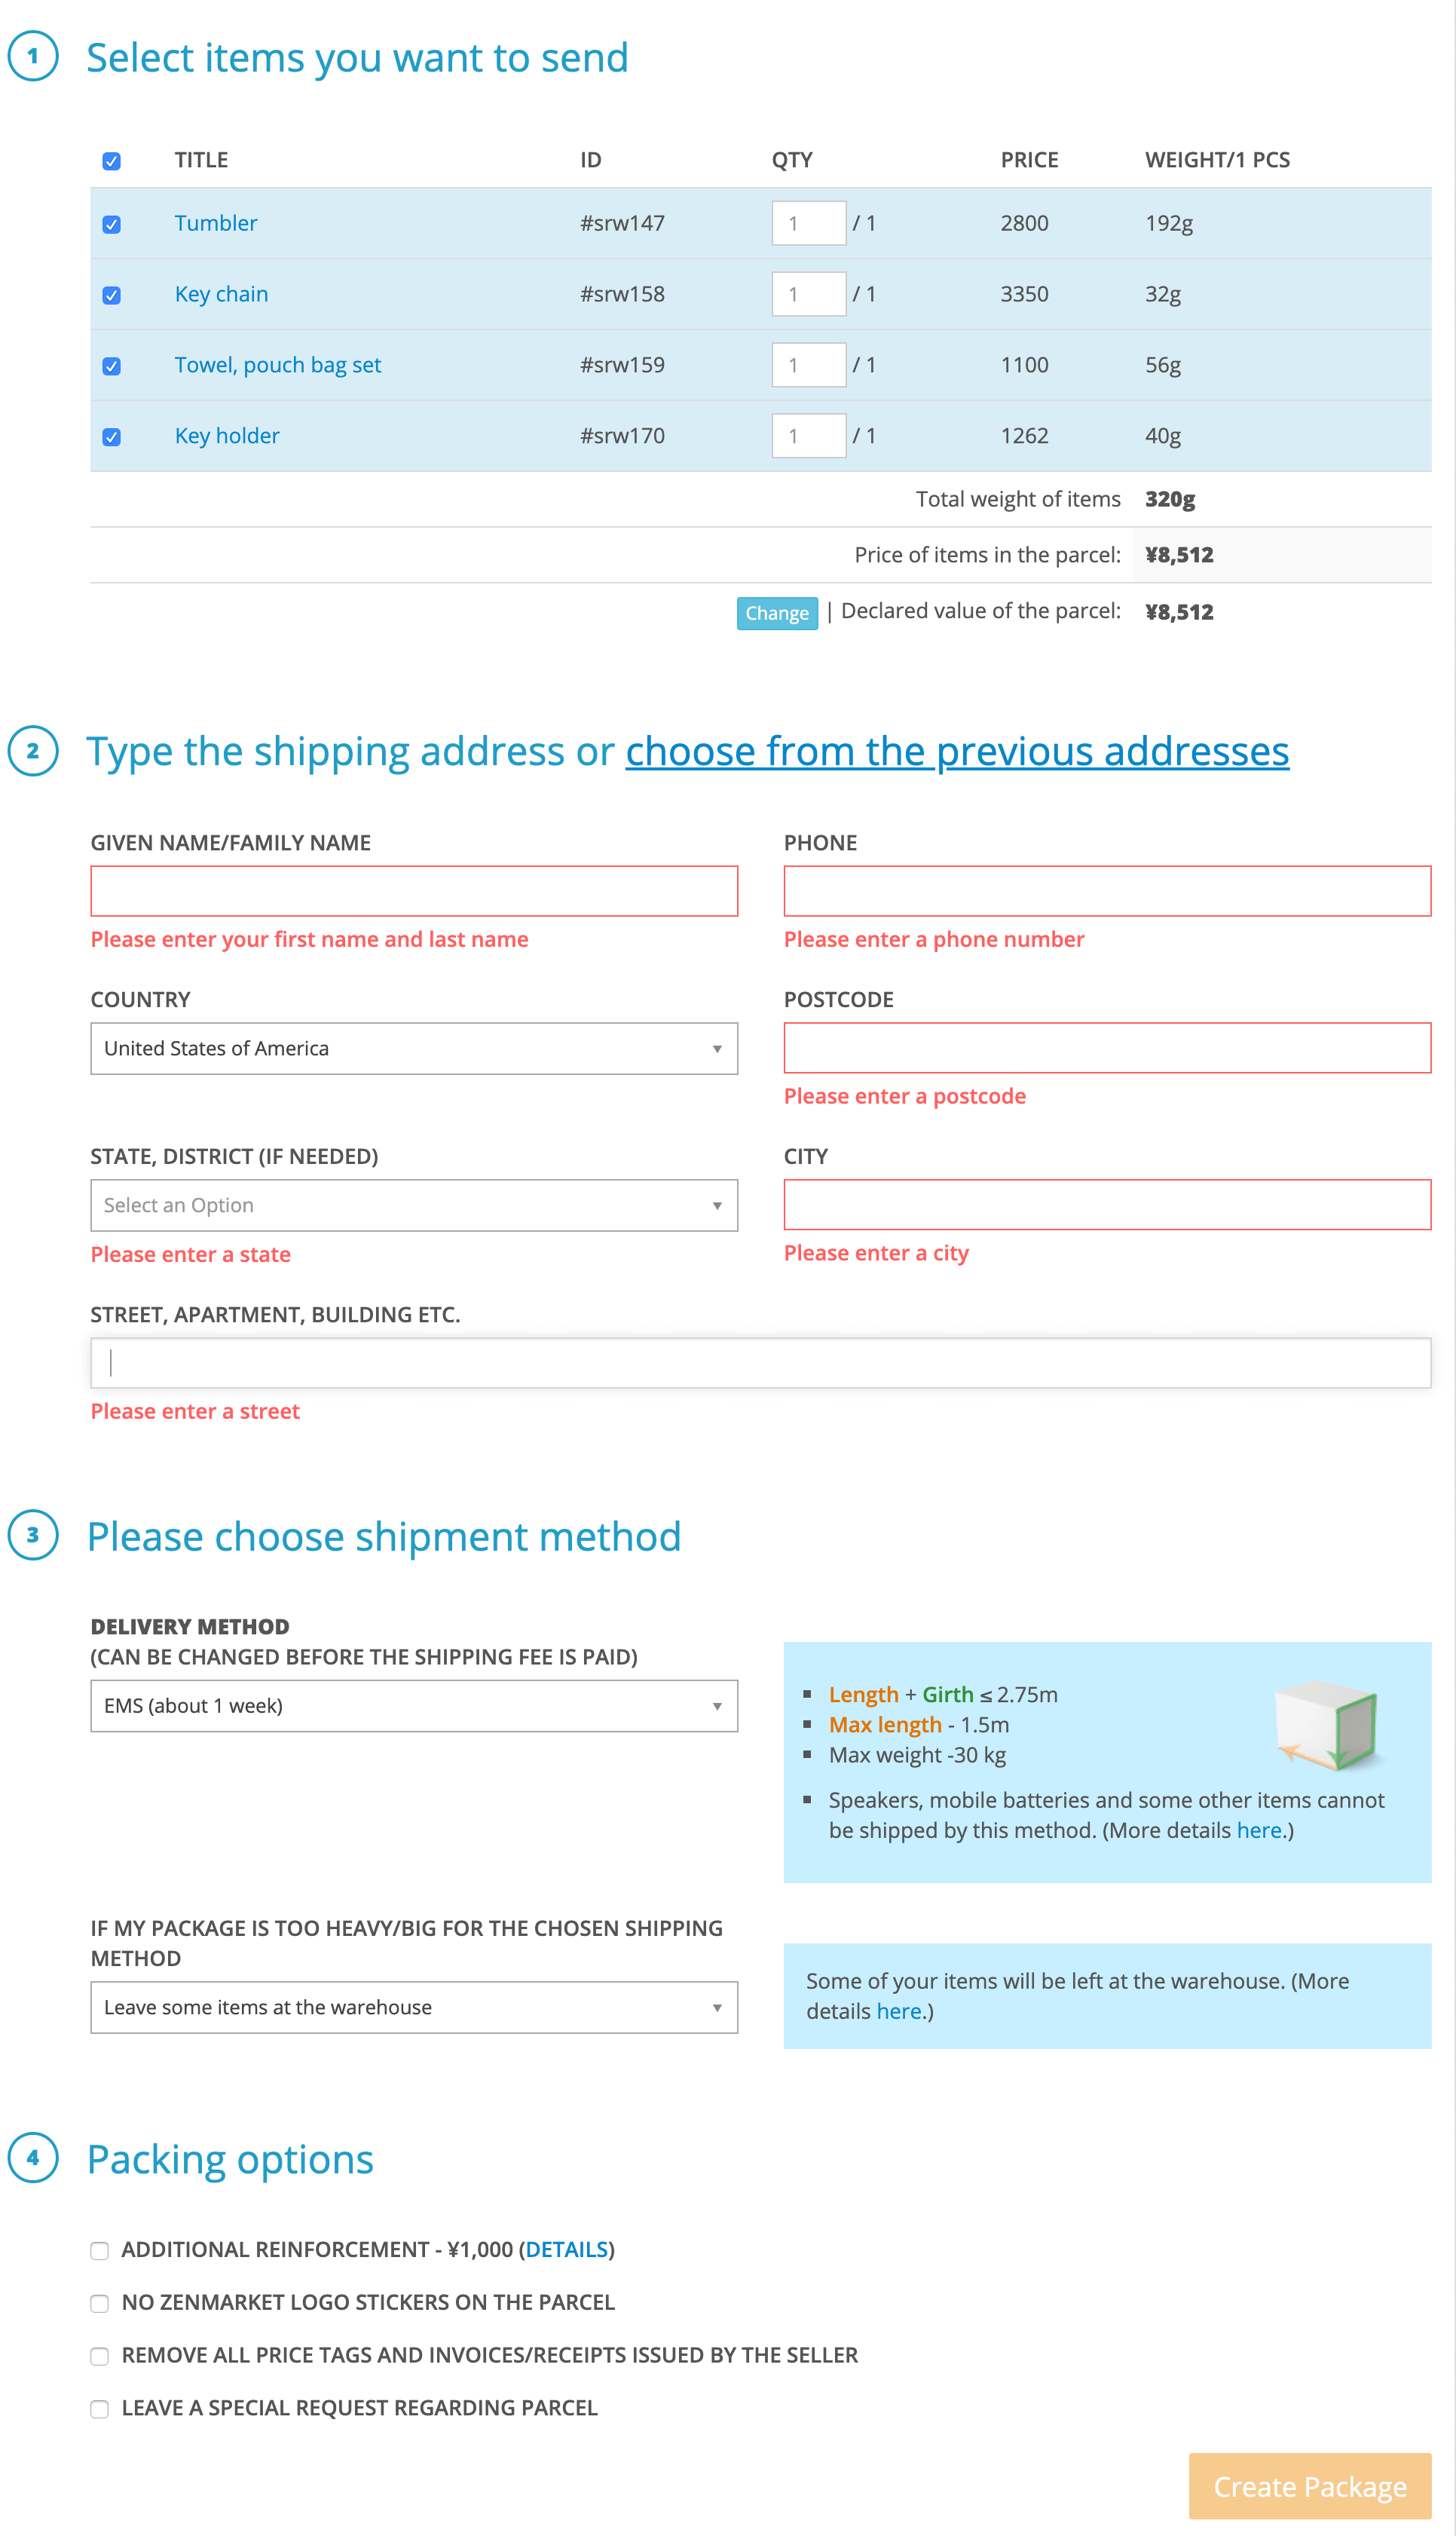 Select your Shipping Method